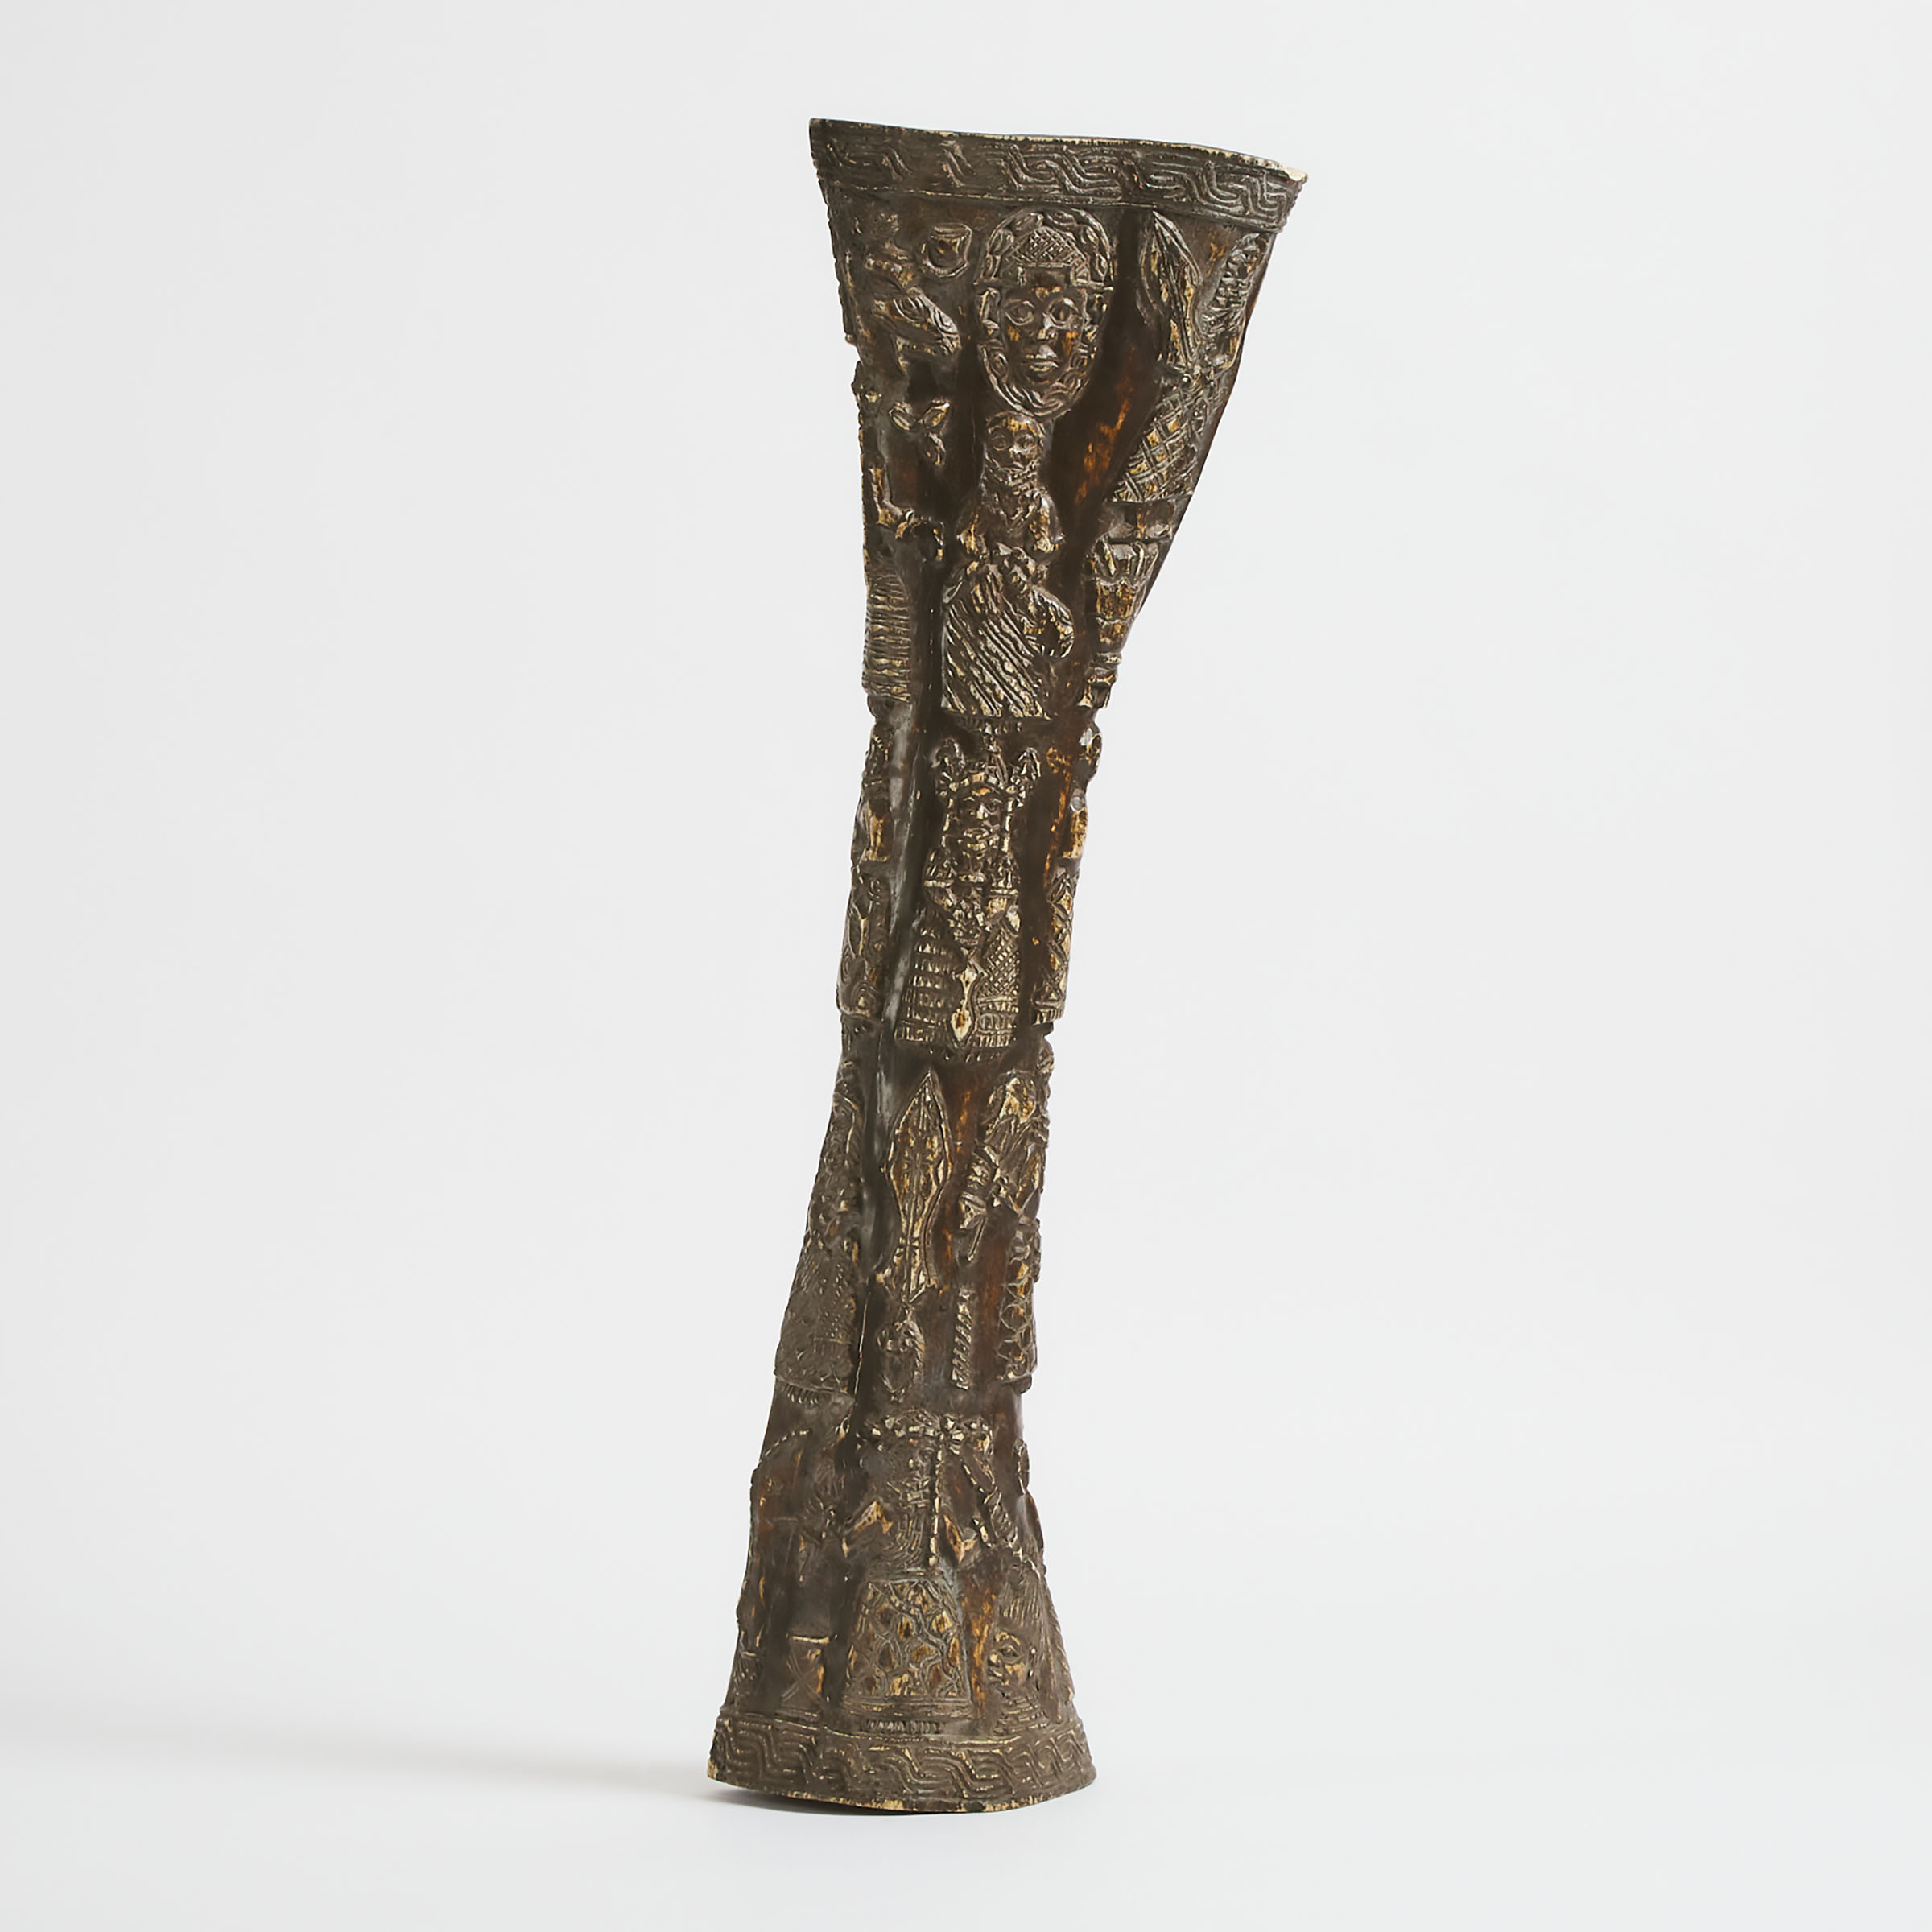 Benin Relief Carved Elephant Femur, Nigeria, West Africa, early to mid 20th century